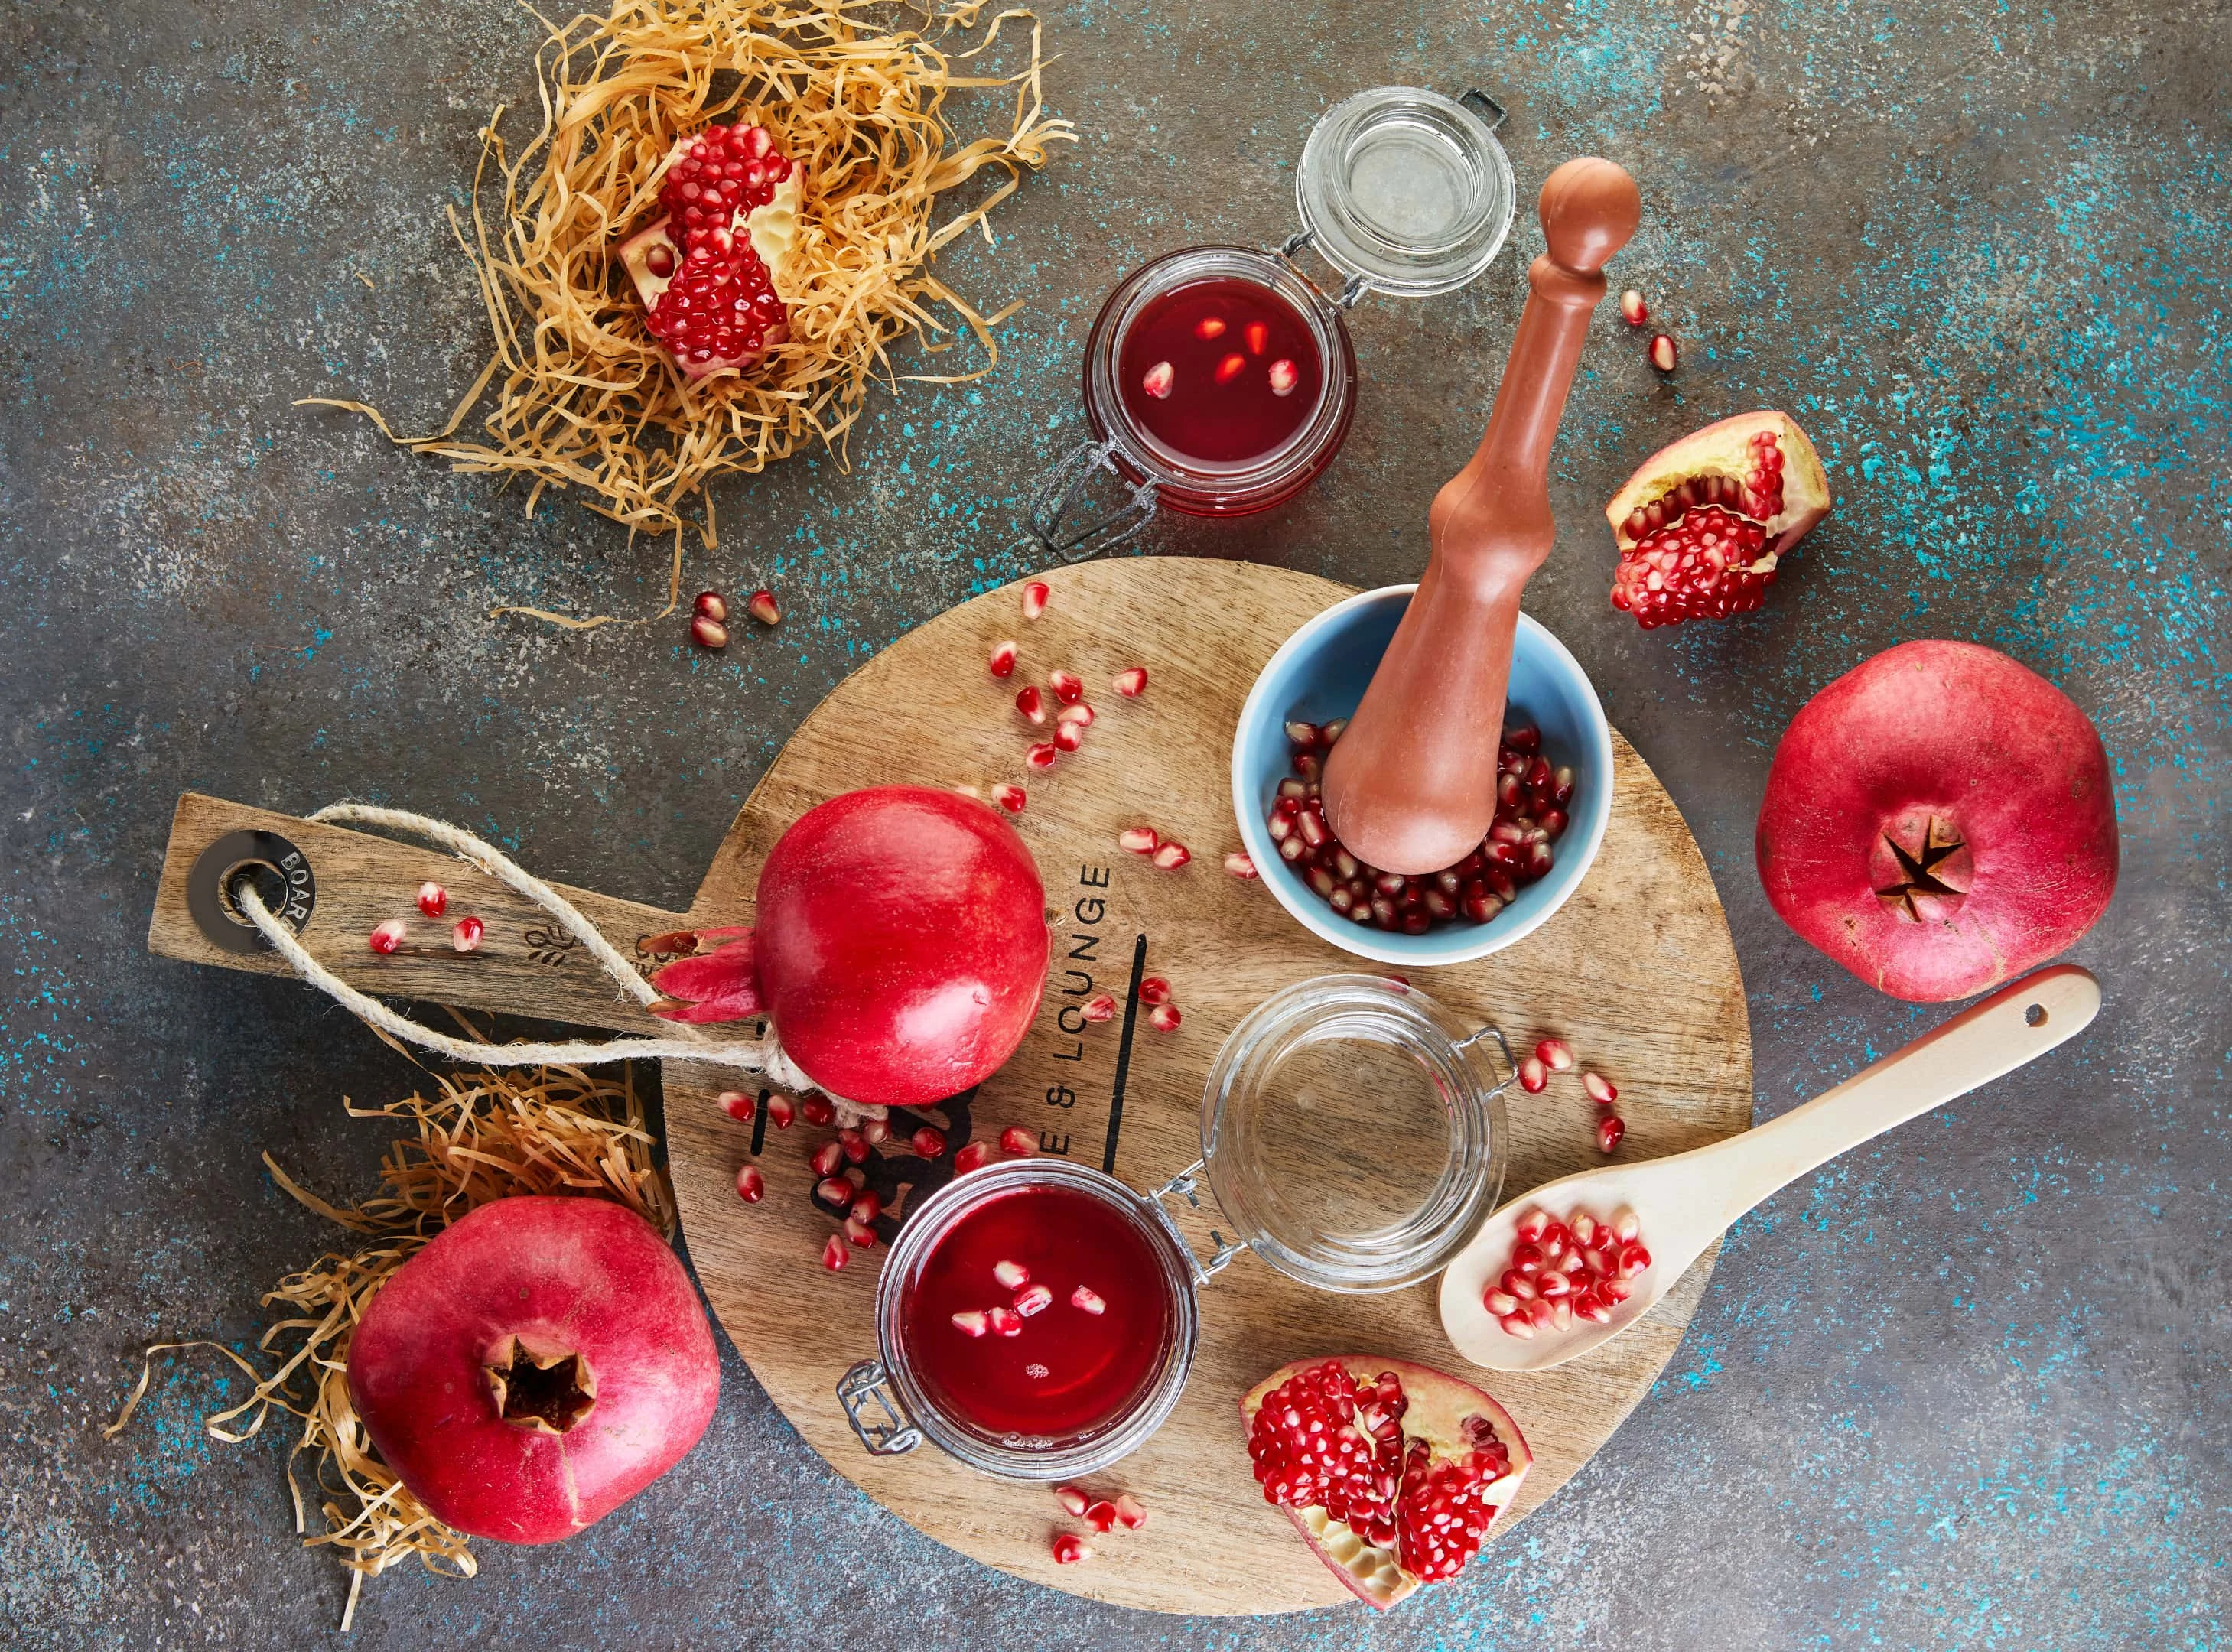 Homemade pomegranate molasses syrup in jars with pomegranate seeds on a wooden board